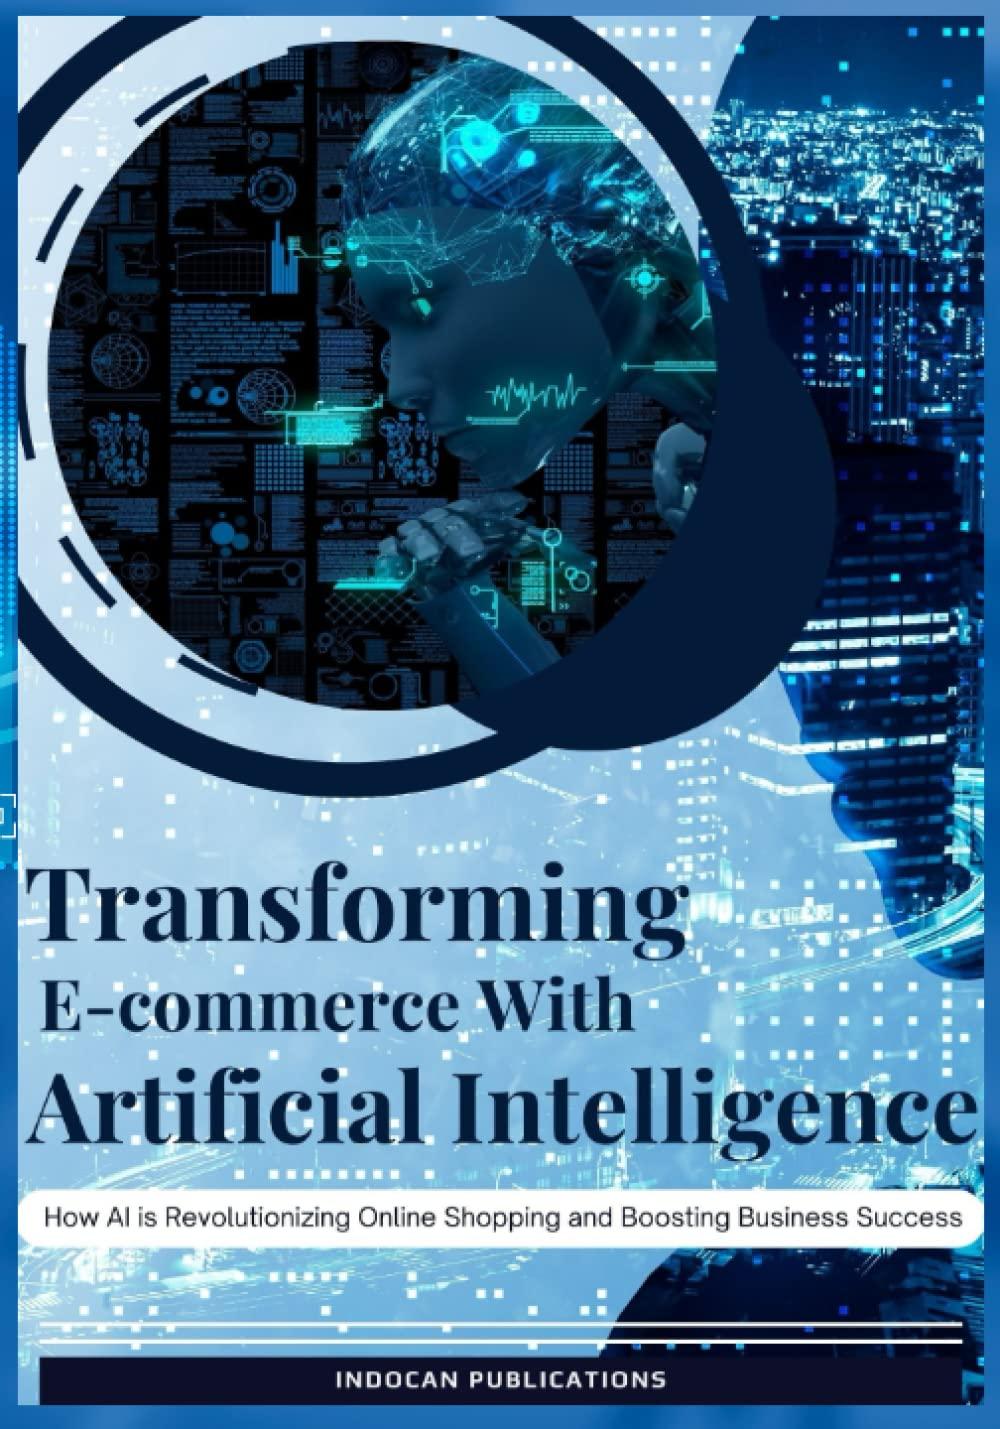 transforming e-commerce with artificial intelligence  how ai is revolutionizing online shopping and boosting